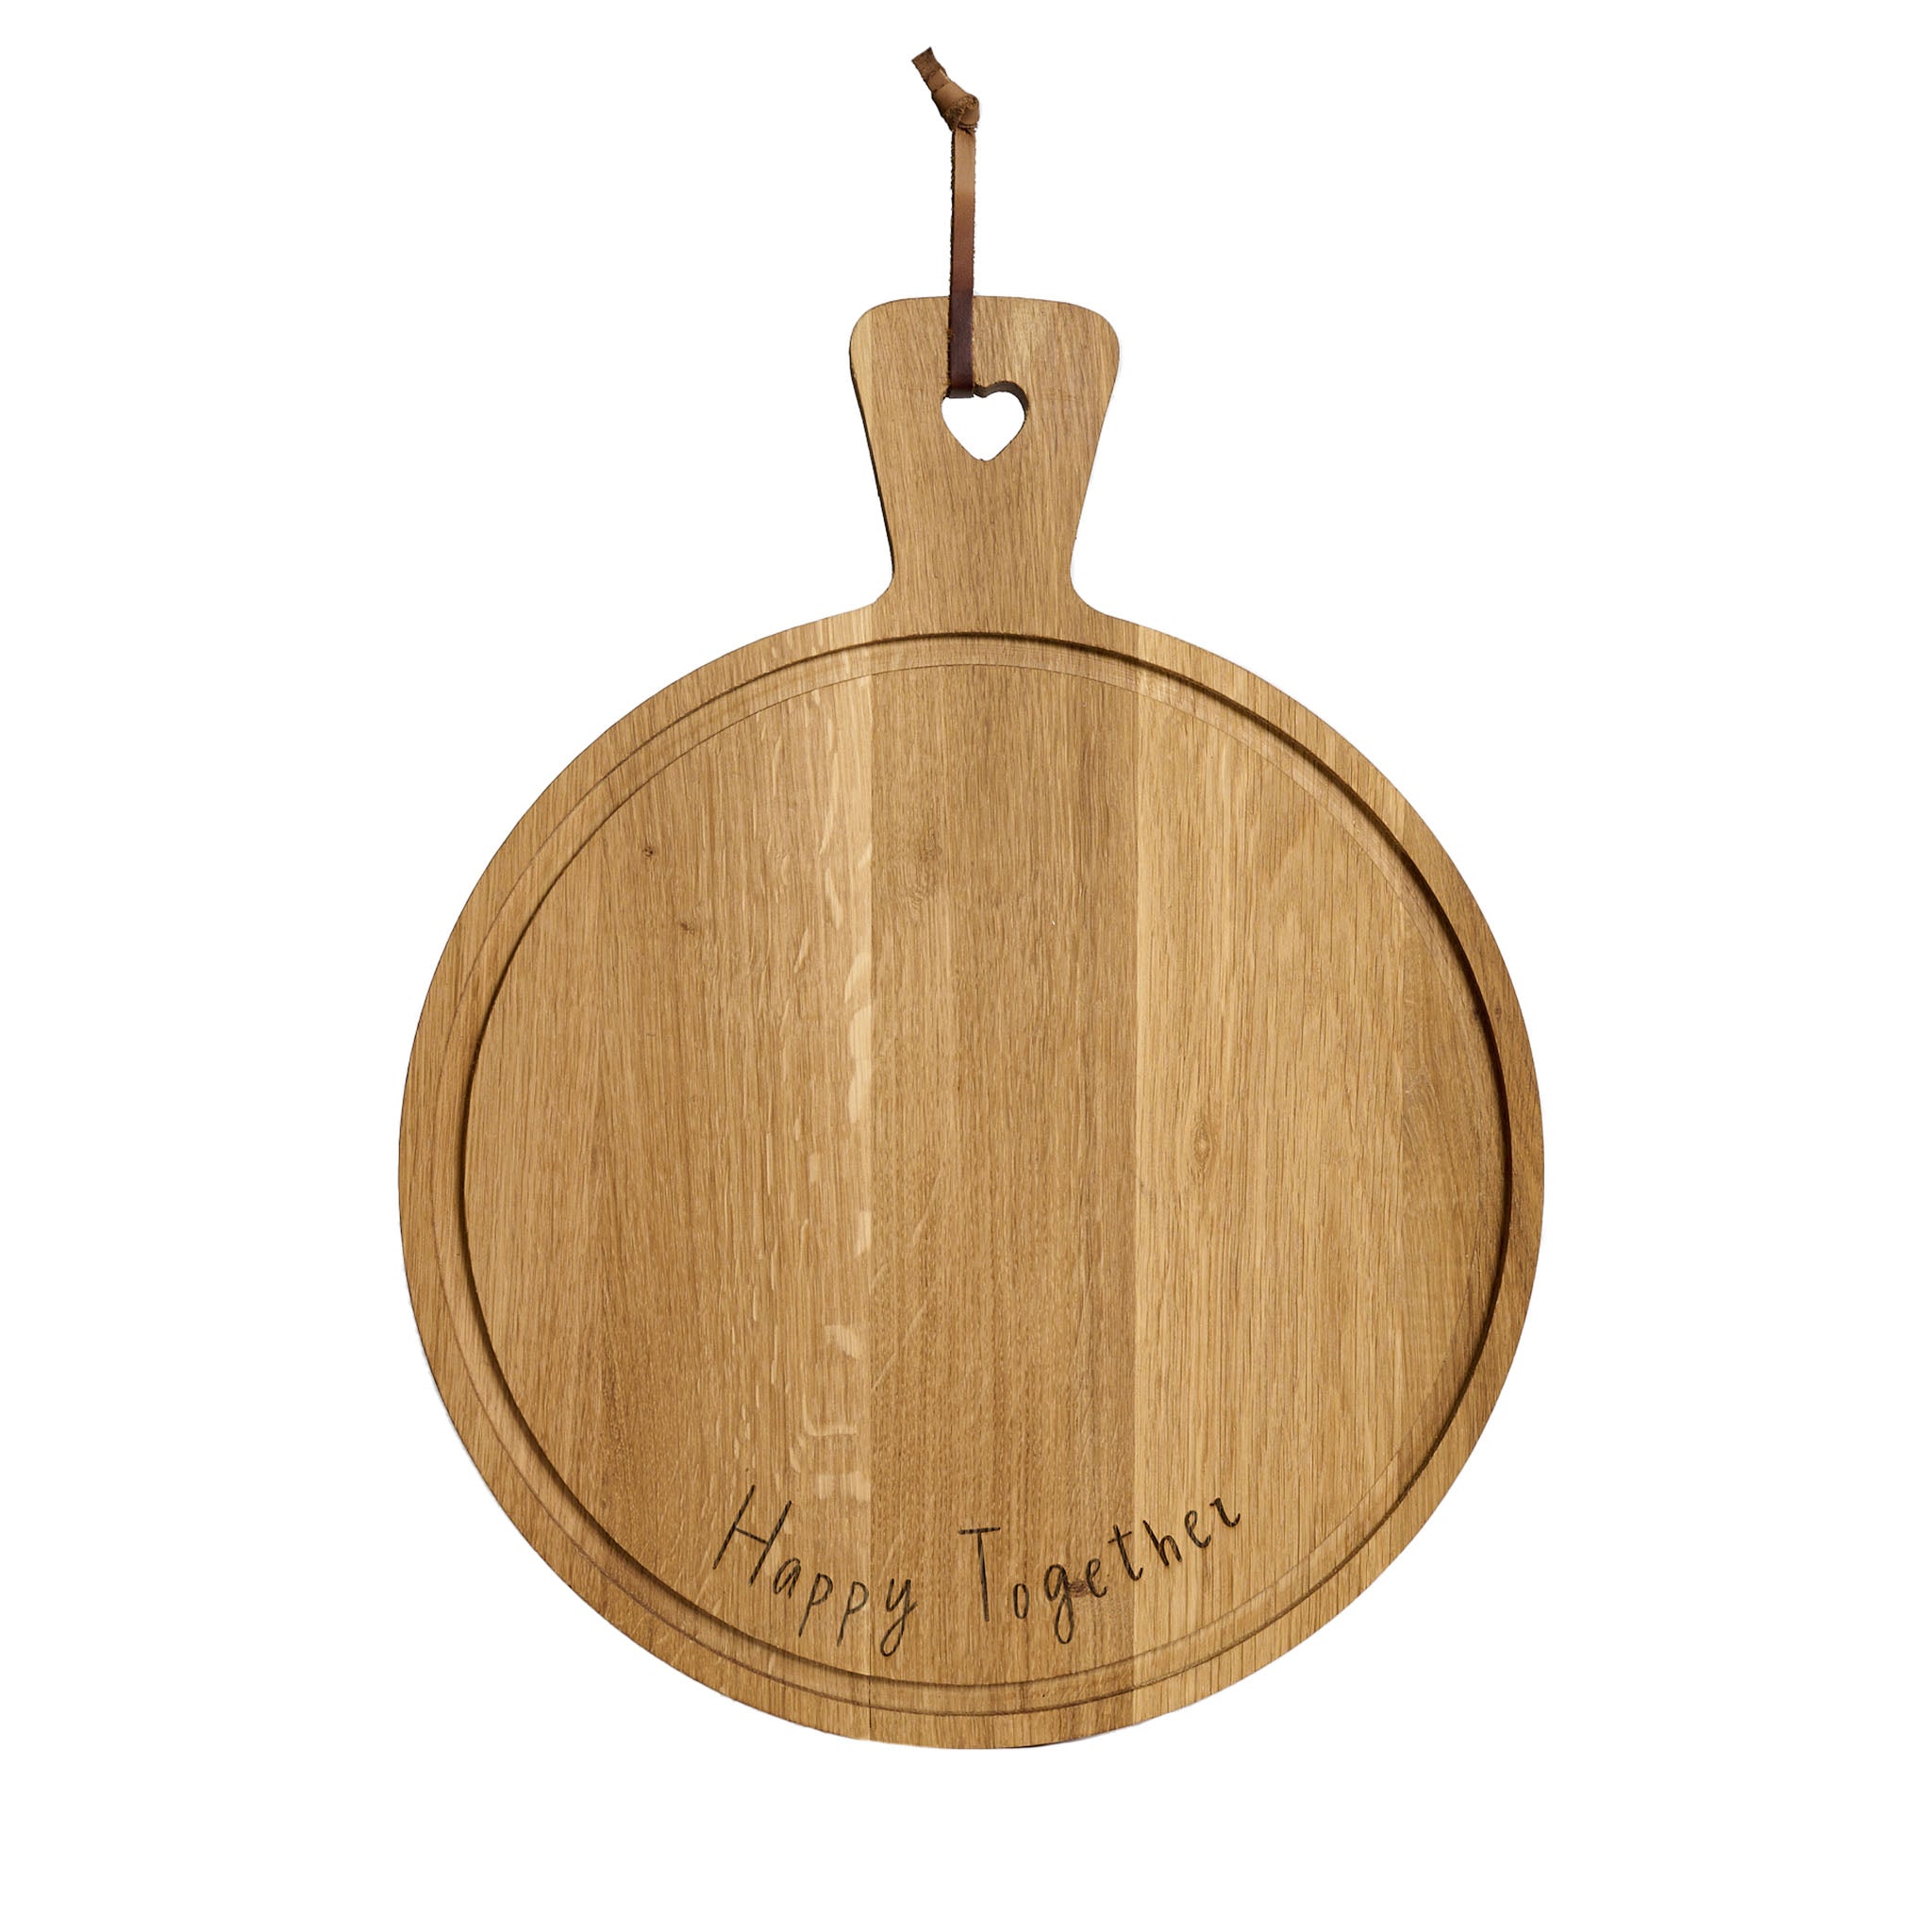 Happy Together round-shaped cutting board